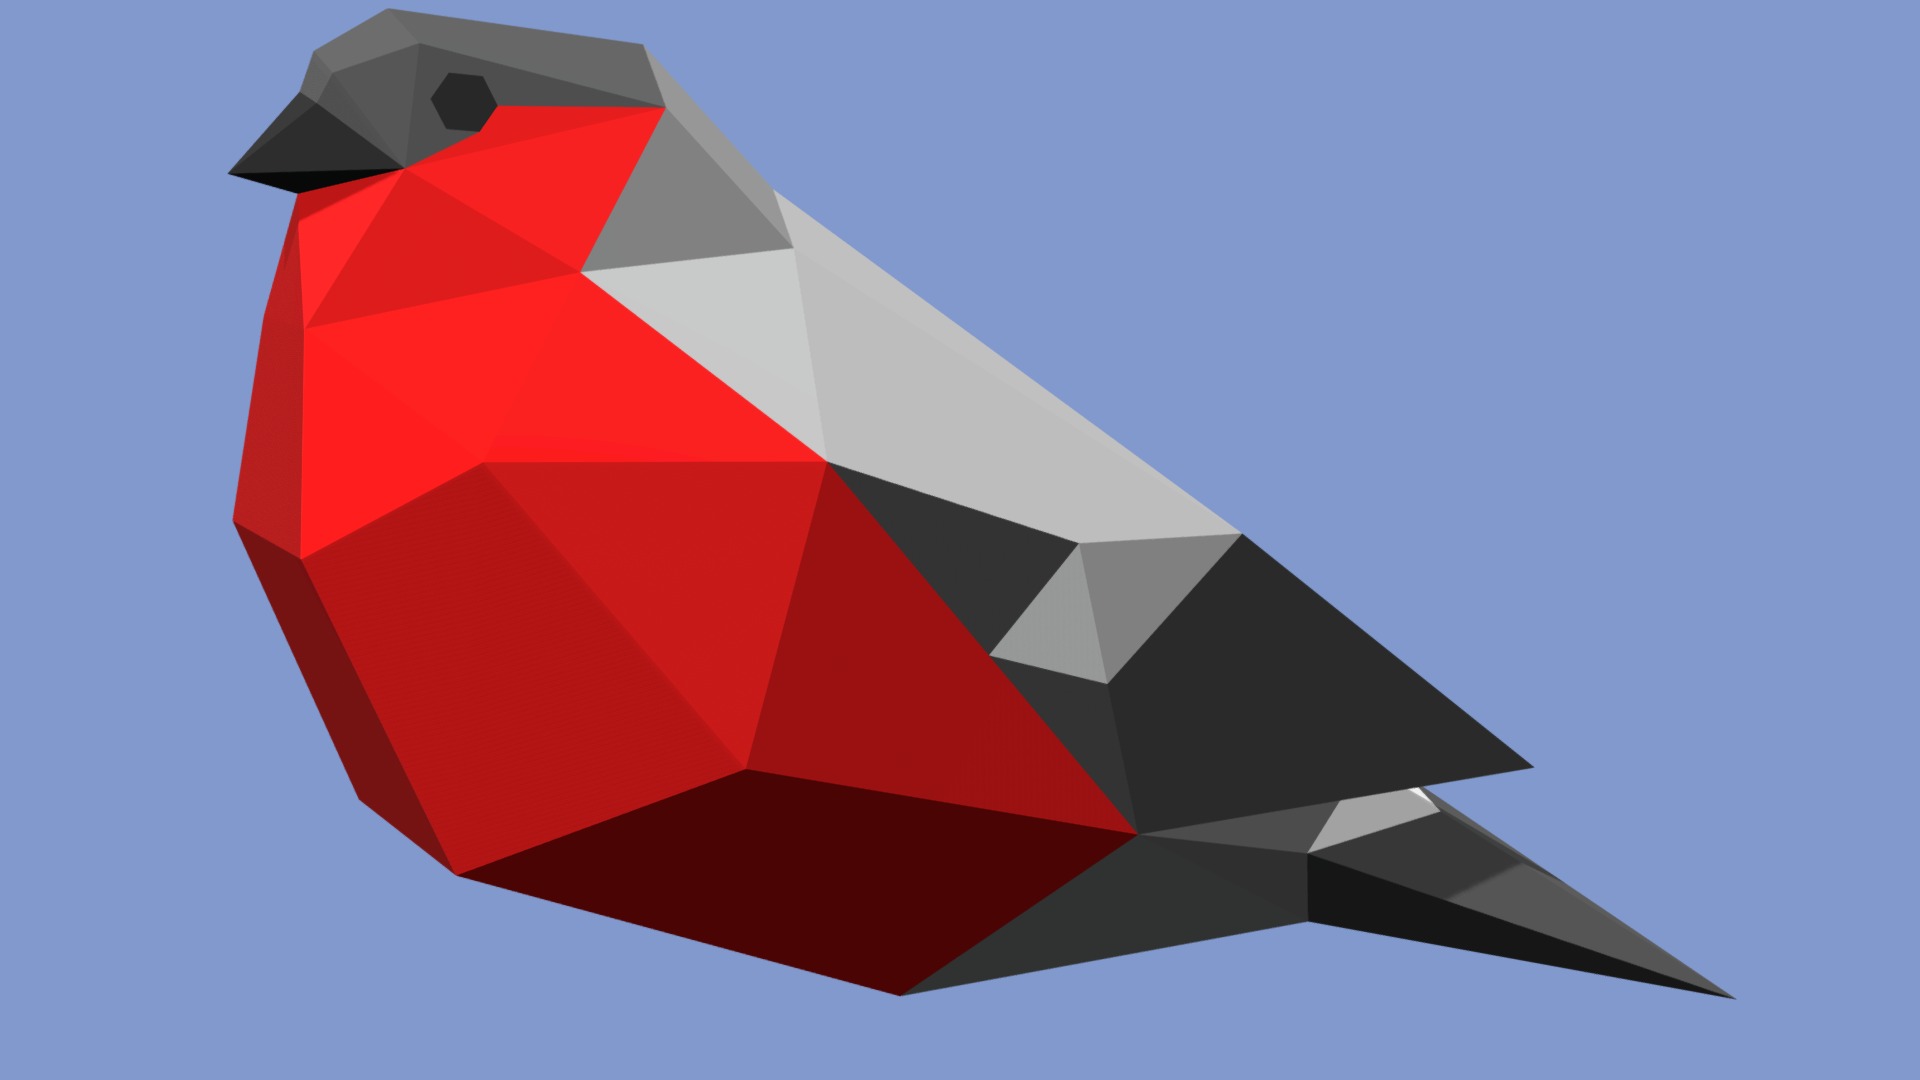 3D model Bullfinch - This is a 3D model of the Bullfinch. The 3D model is about a red and black triangle.